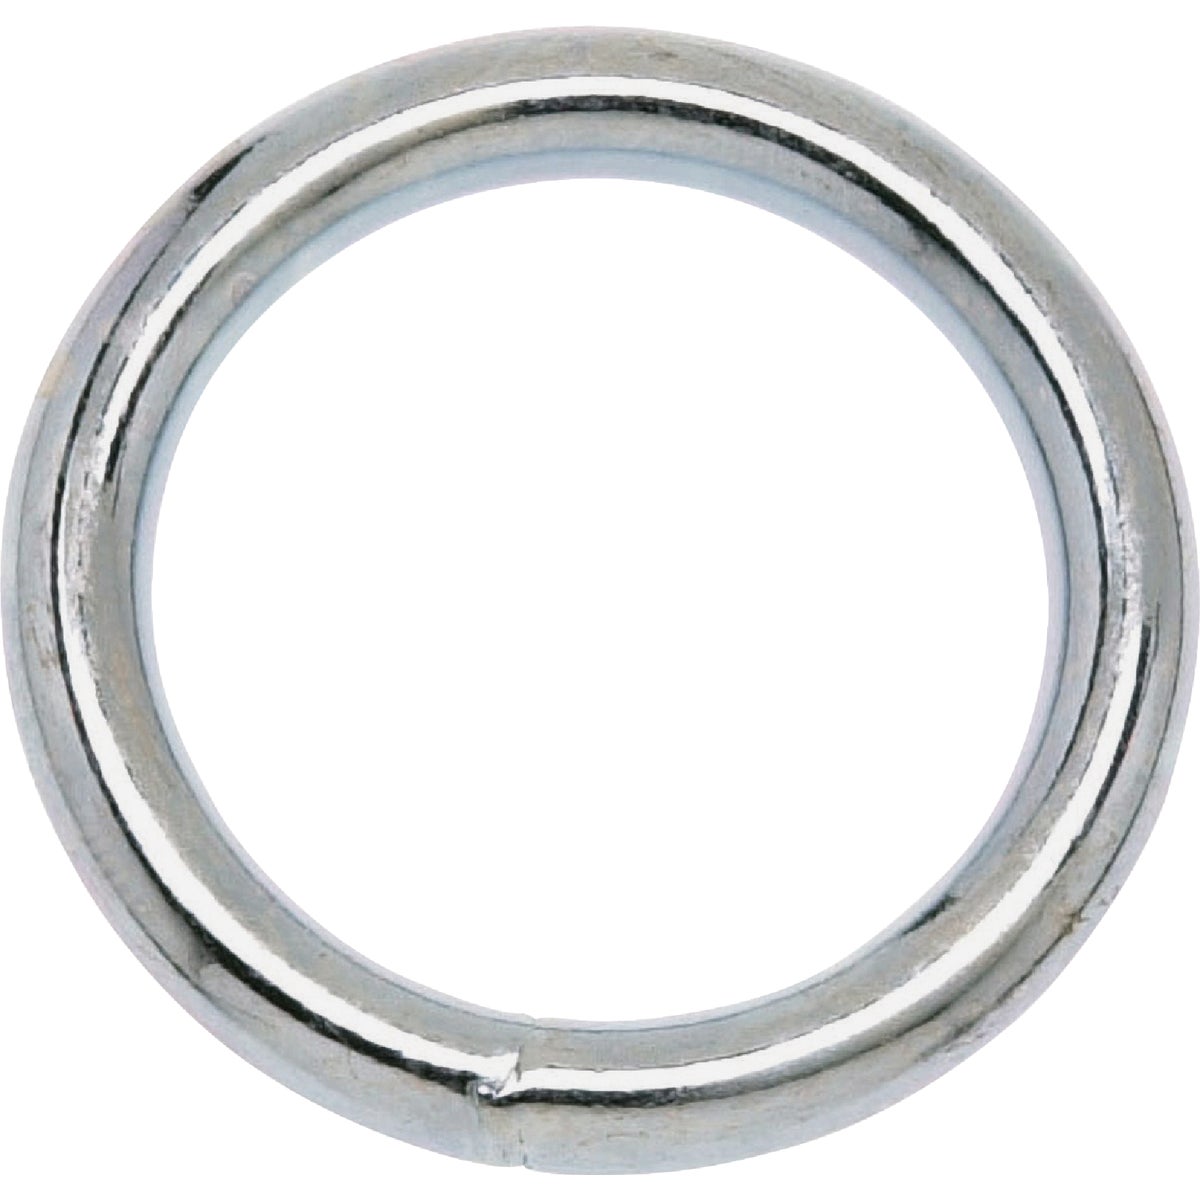 Item 769648, Polished bronze, durable welded round ring.